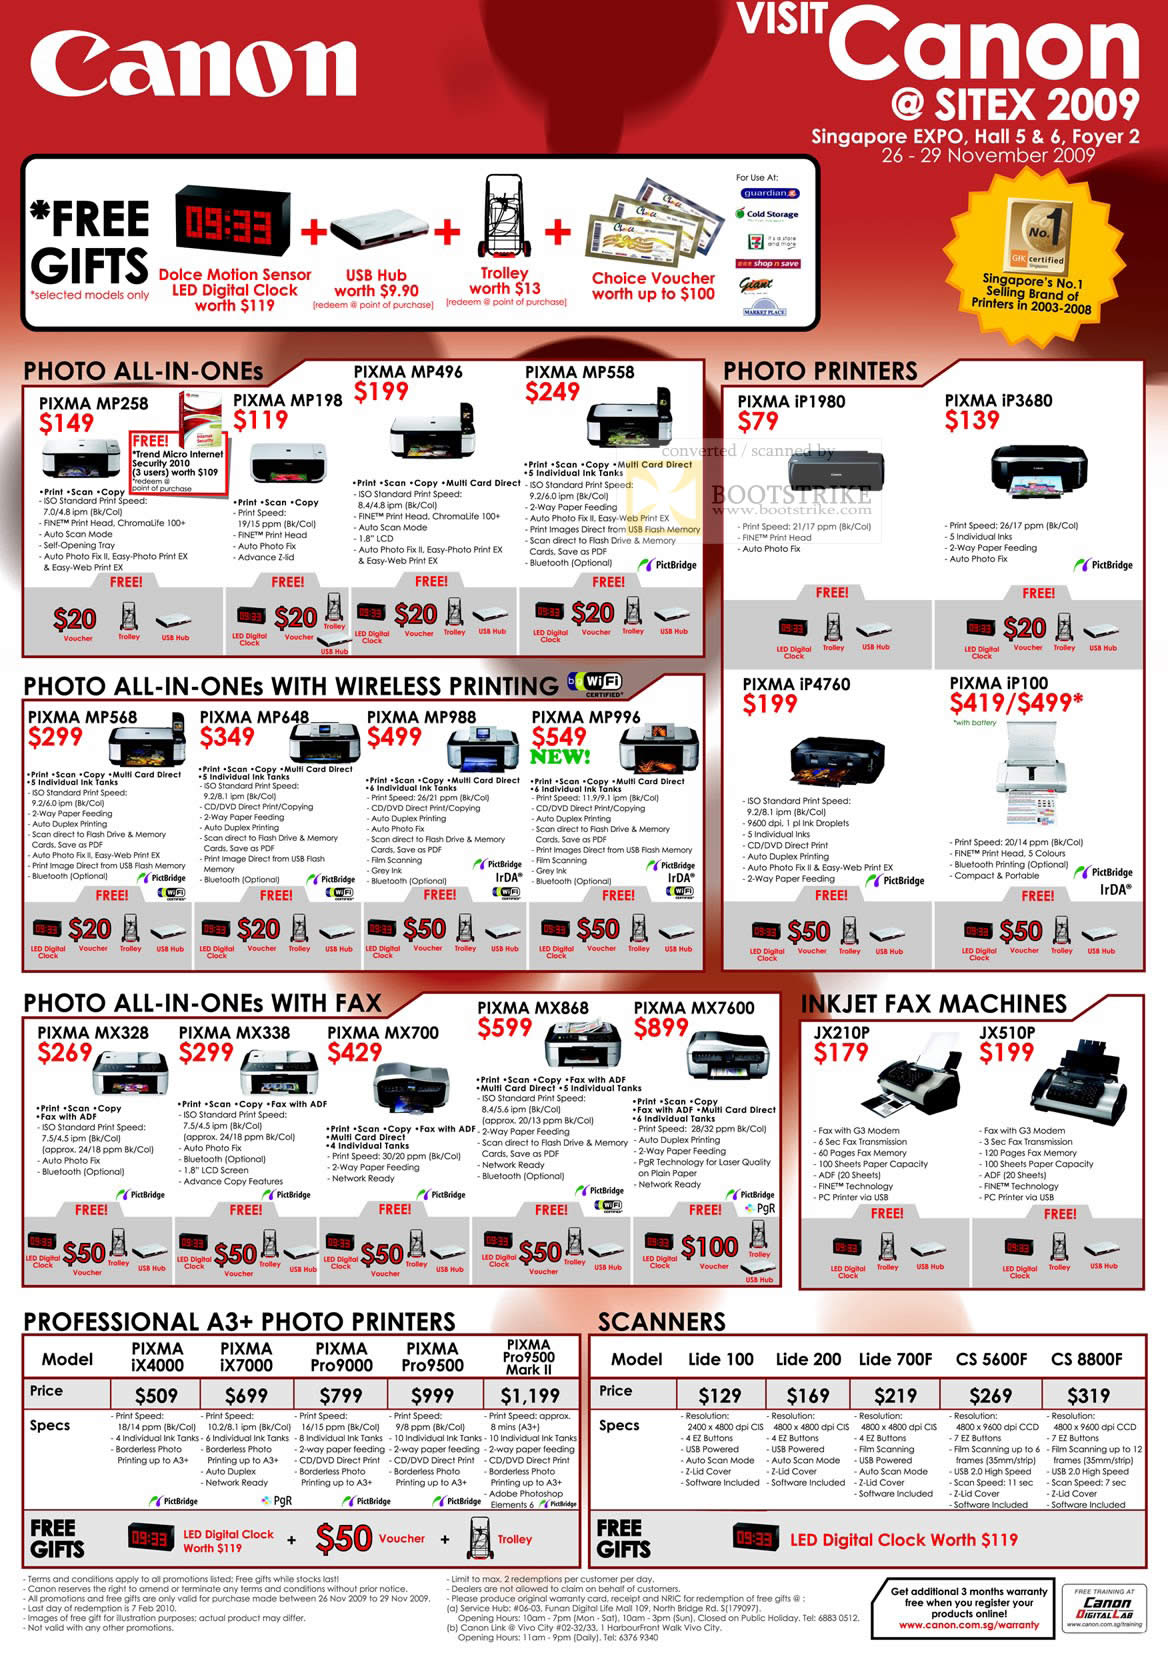 Sitex 2009 price list image brochure of Canon Photo Inkjet Printers Pixma MP All In One Fax Professional Scanners